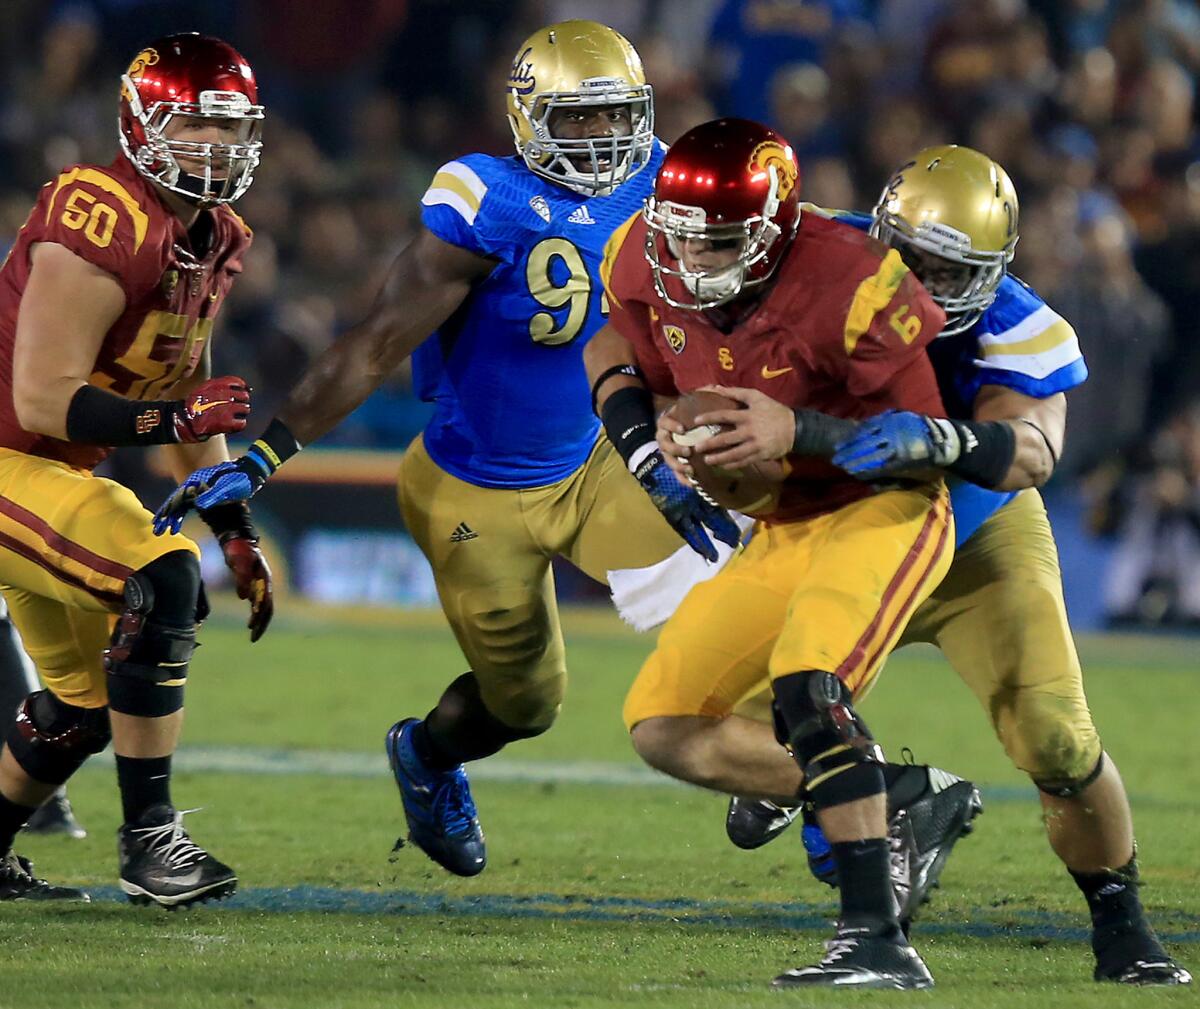 USC quarterback Cody Kessler is brought down by UCLA defensive lineman Eddie Vanderdoes during the fourth quarter. Kessler was sacked six times by the Bruins in the Trojans' 38-20 loss.